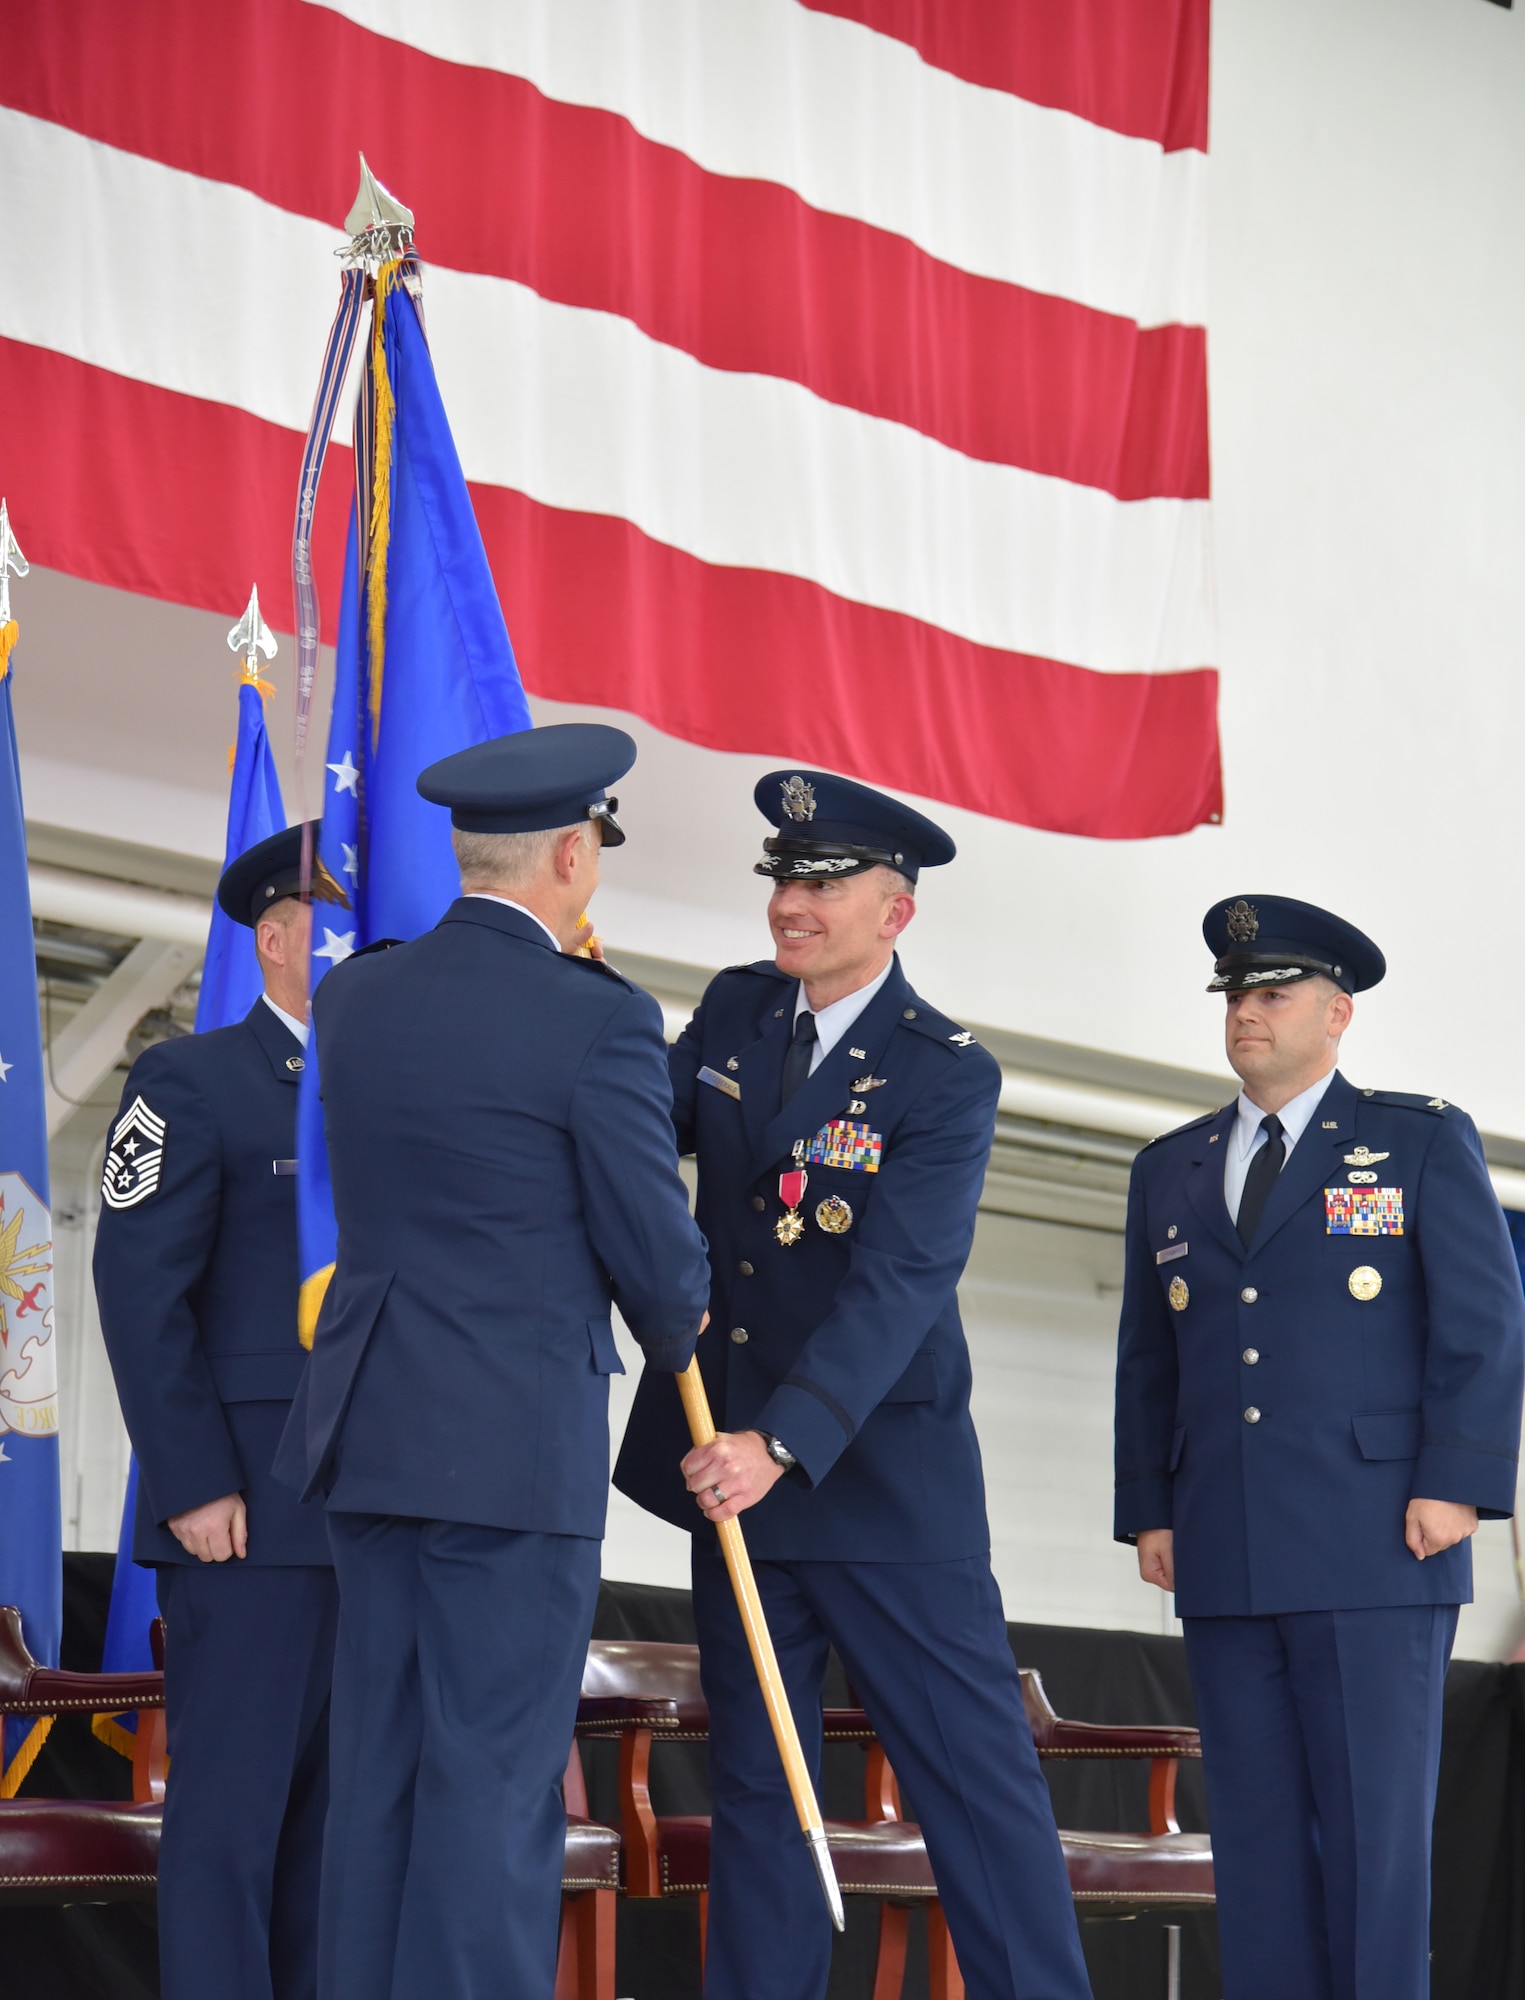 Col. Paul T. Fitzgerald, outgoing 142nd Fighter Wing Commander, hands the Unit Guidon to Maj. Gen. Michael E. Stencel, The Adjutant General, Oregon, as Fitzgerald relinquishes command of the 142nd Fighter Wing during a Change of Command ceremony held Nov. 6, 2016, Portland Air National Guard Base, Ore. (U.S. Air National Guard photograph by Staff Sgt. Brandon Boyd, 142nd Fighter Wing Public Affairs)